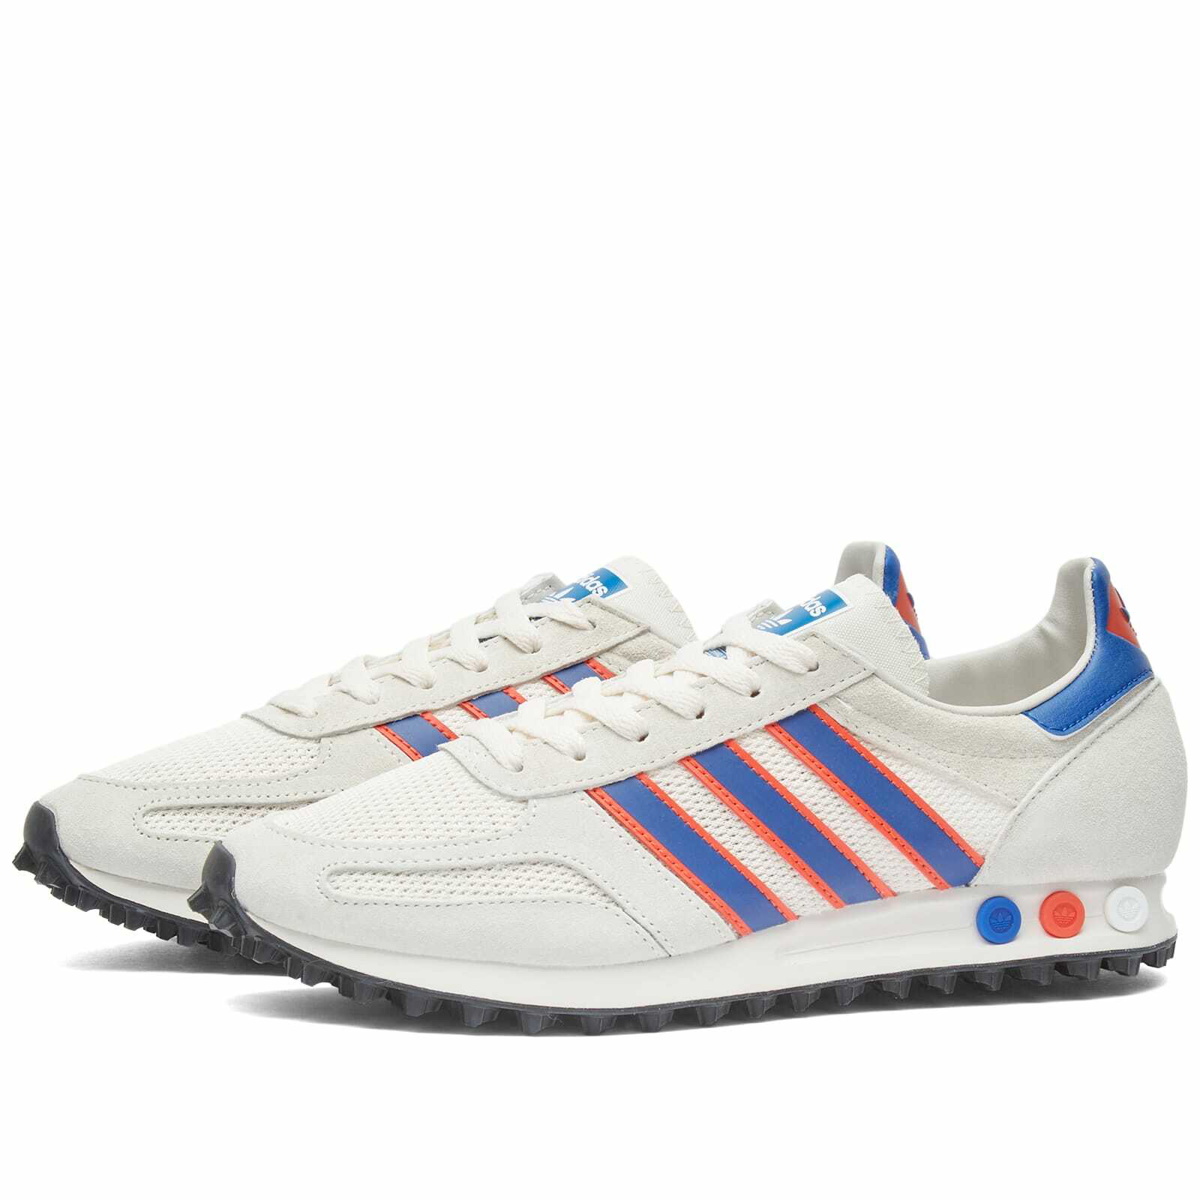 tempo Ledig Læne Adidas La Trainer S Sneakers in White/Blue/Red adidas